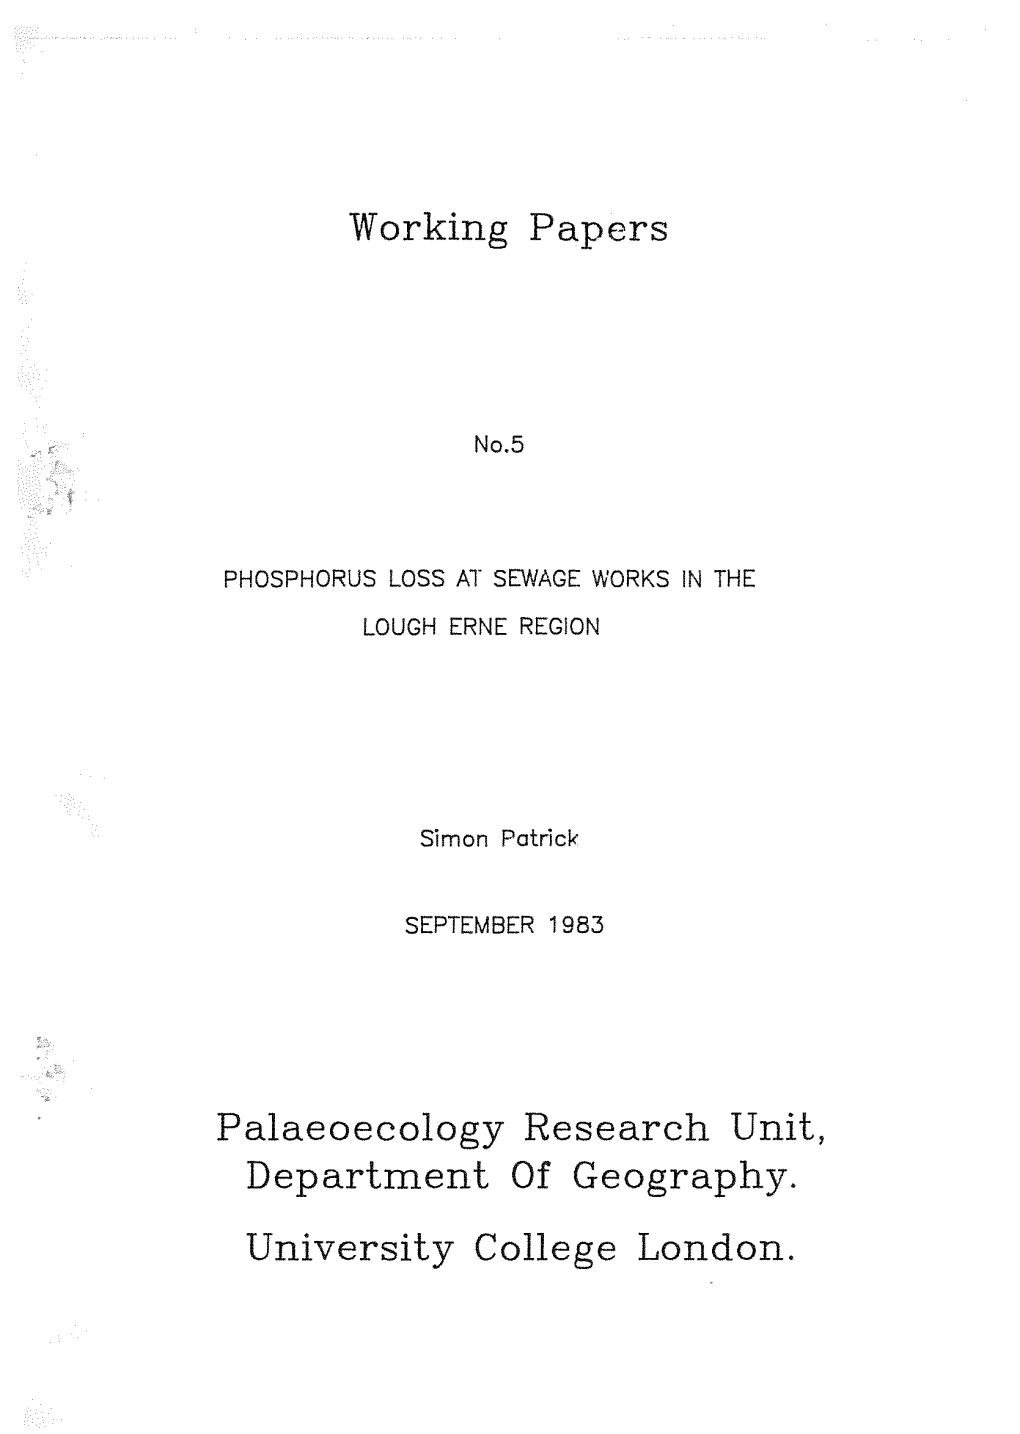 Working Papers Palaeoecology Research Unit, Department Of